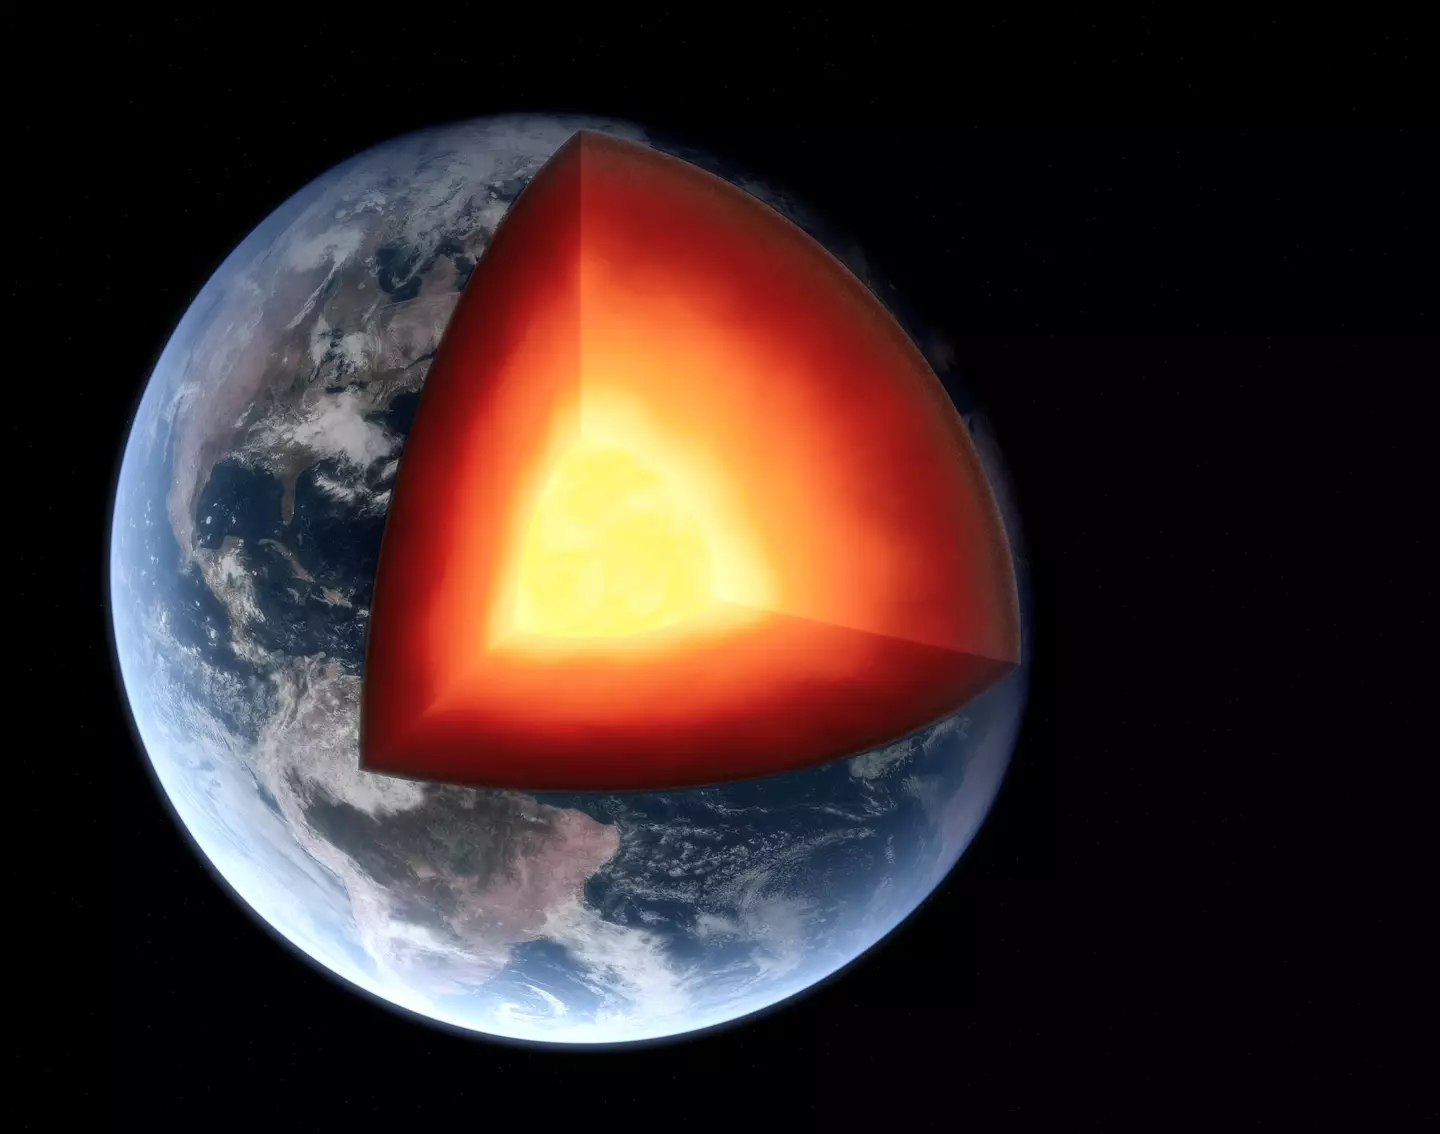 Scientists have discovered a massive solid metal ball inside Earth's core.